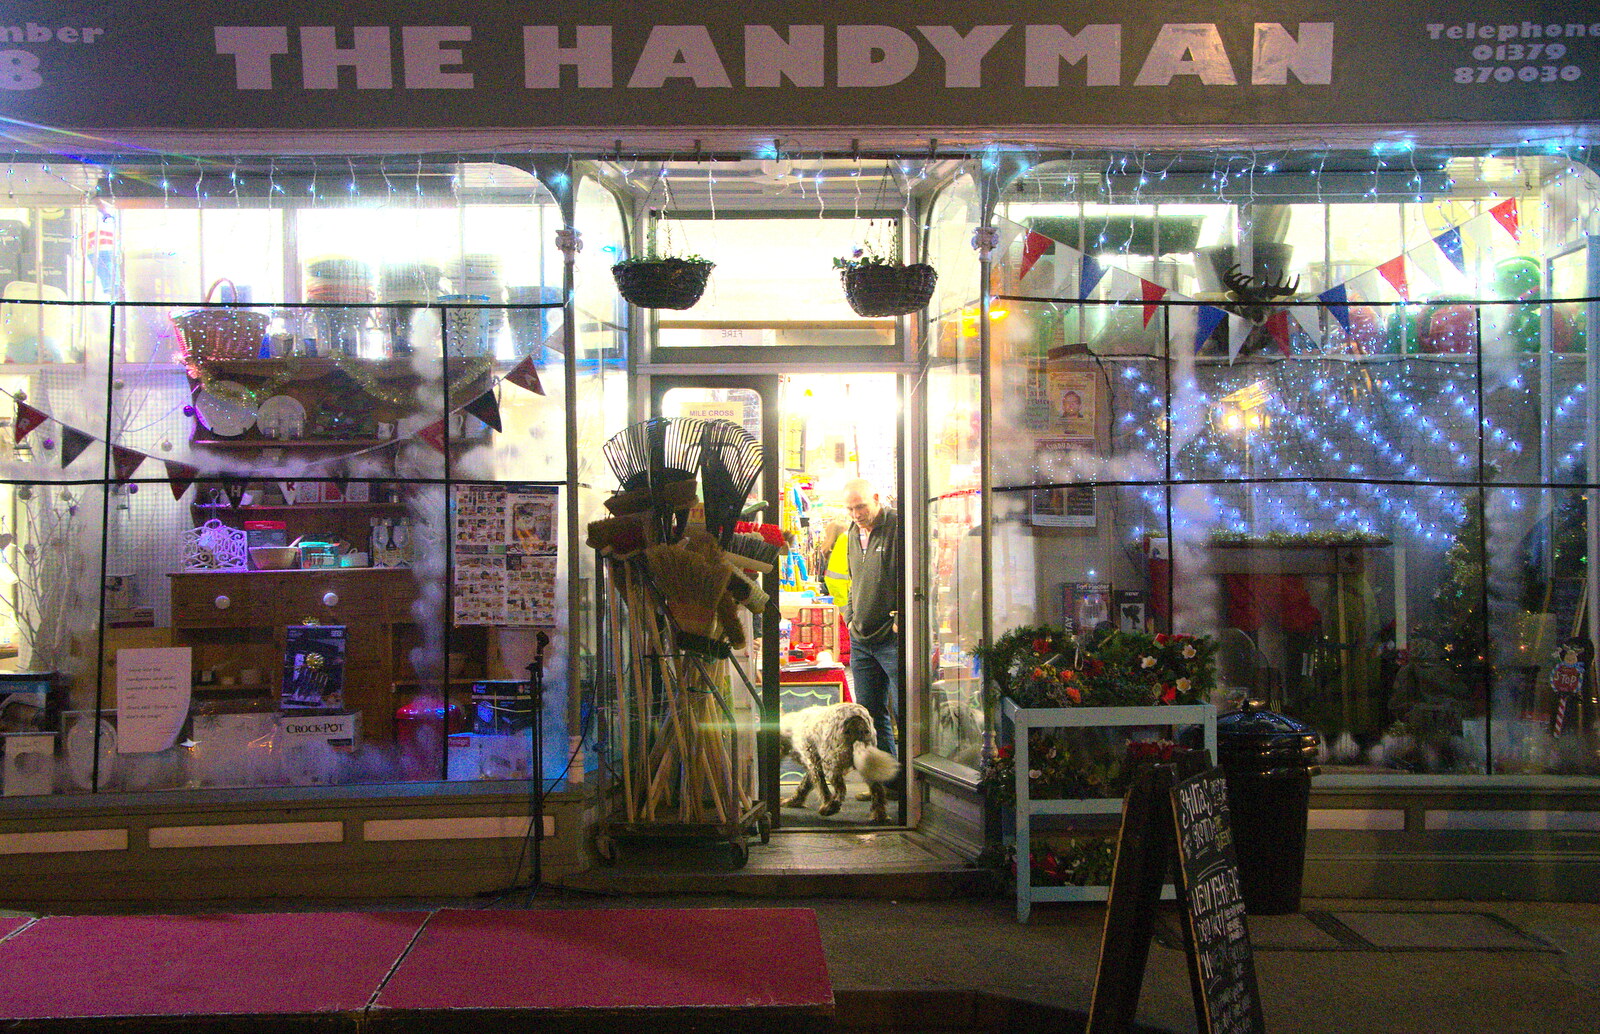 A dog wanders into the Handyman from The Eye Christmas Lights, and a Trip to Norwich, Norfolk - 4th December 2015